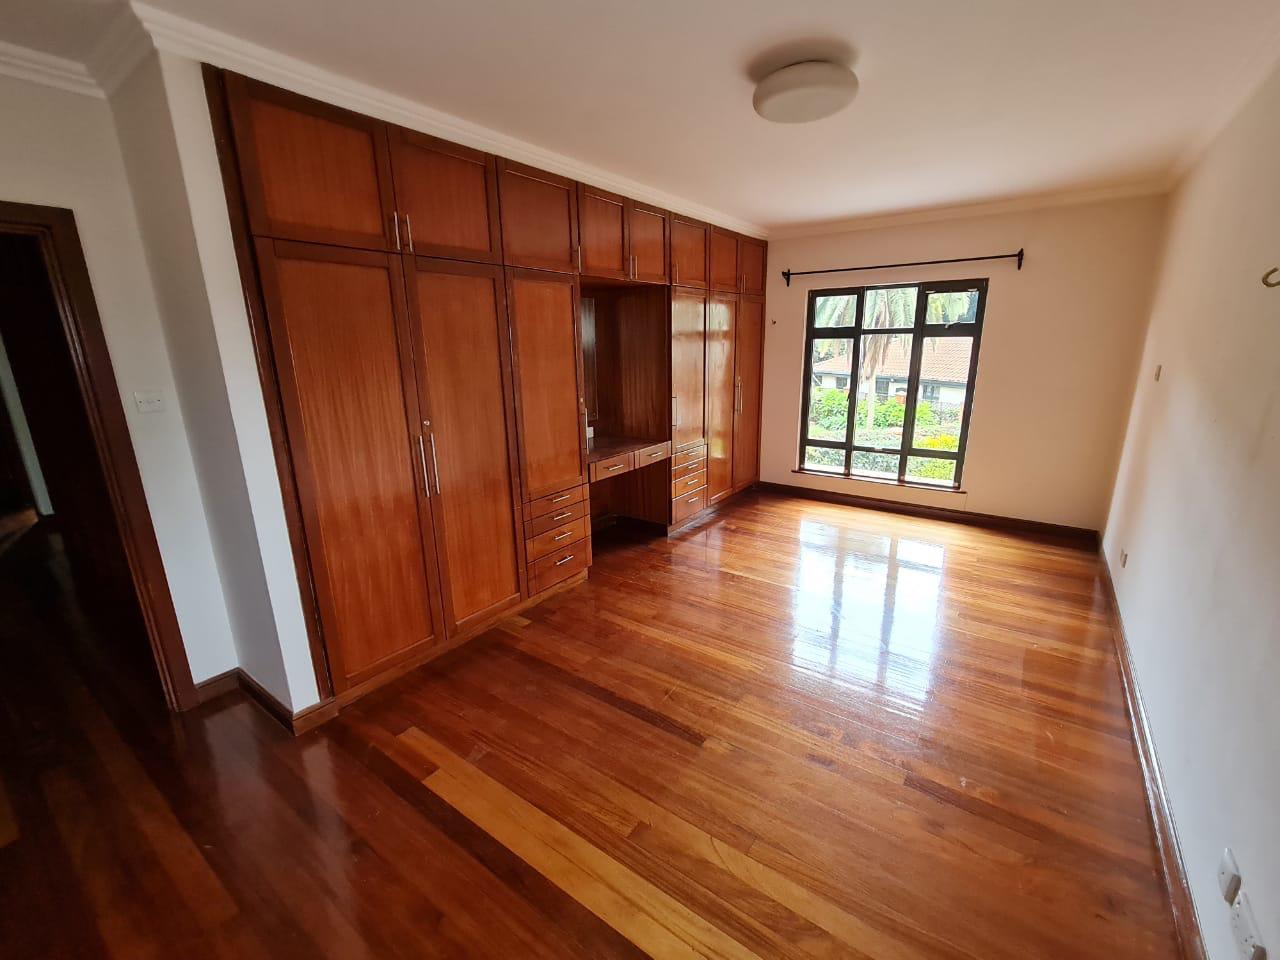 Lovely 4 bedroom Townhouse plus dsq for rent at Ksh330k in Westlands, ensuite, family room, office, detached dsq for 2, very well maintained and more amenities15